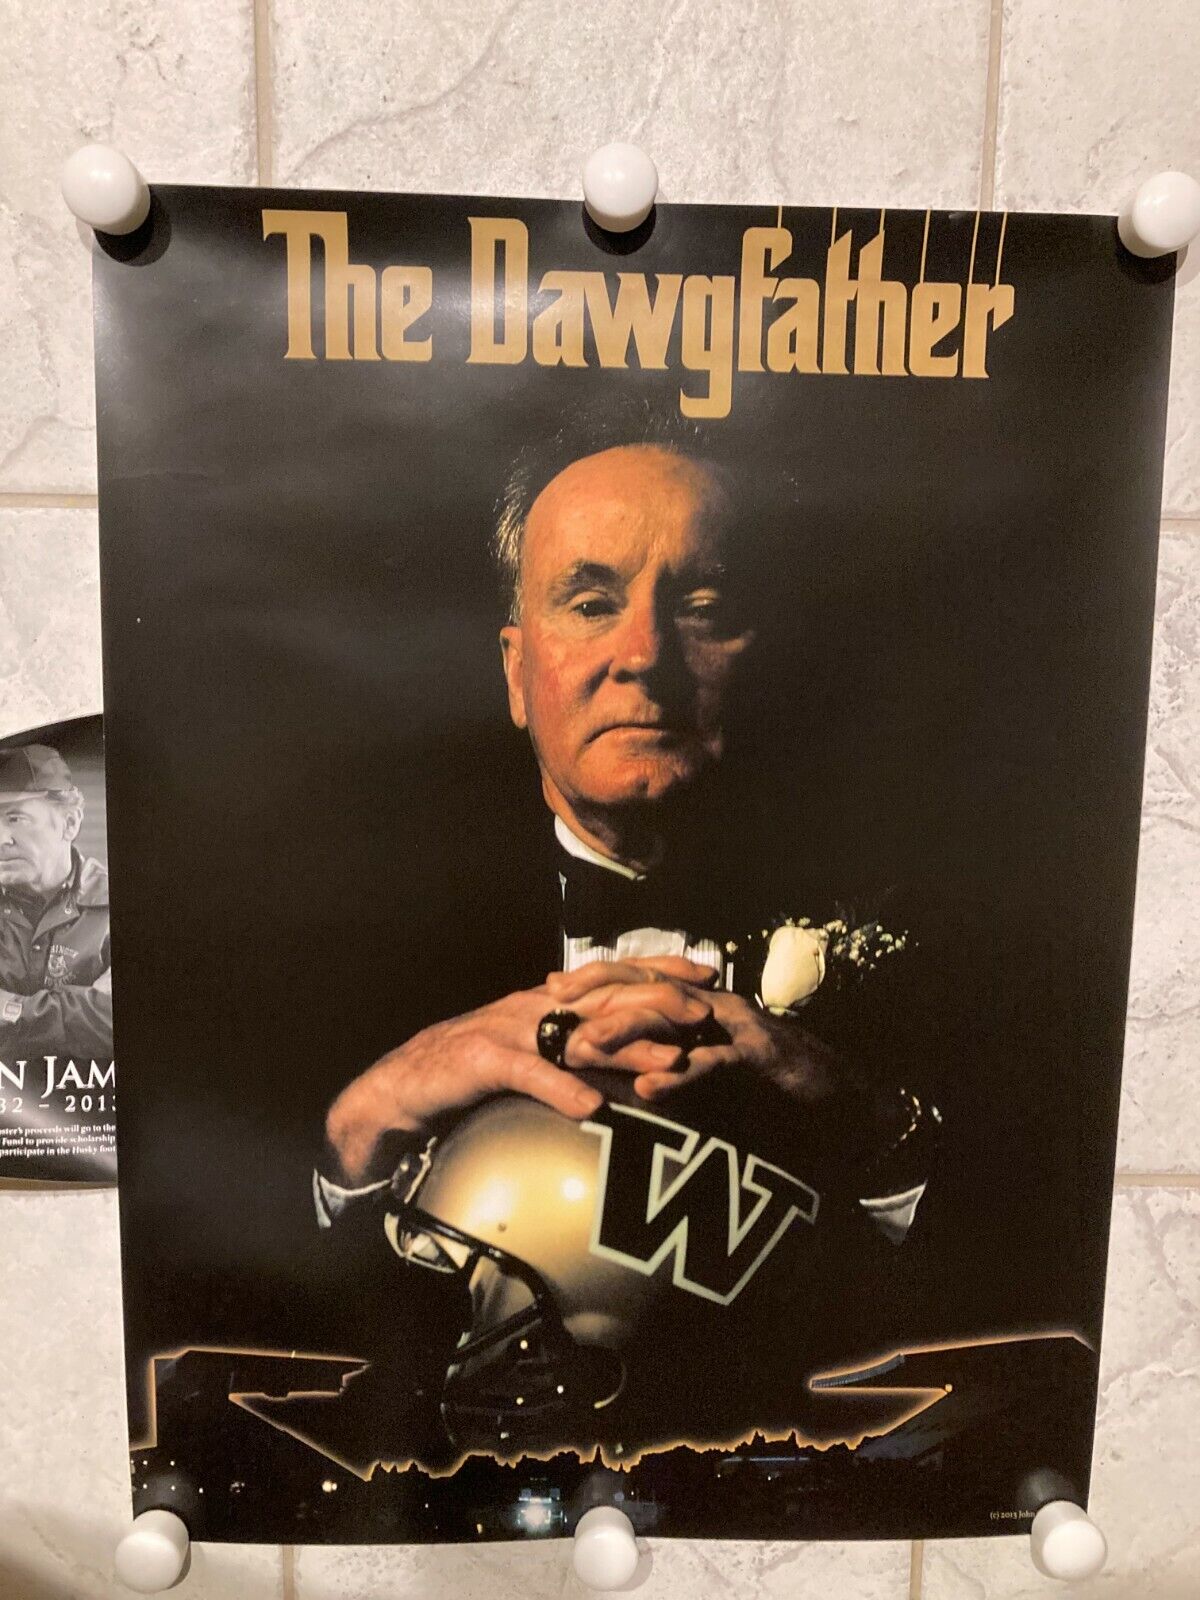 THE DAWGFATHER Poster 18X24 DON JAMES Sale Industry No. 1 Special Price Washington 1932-20 Huskies